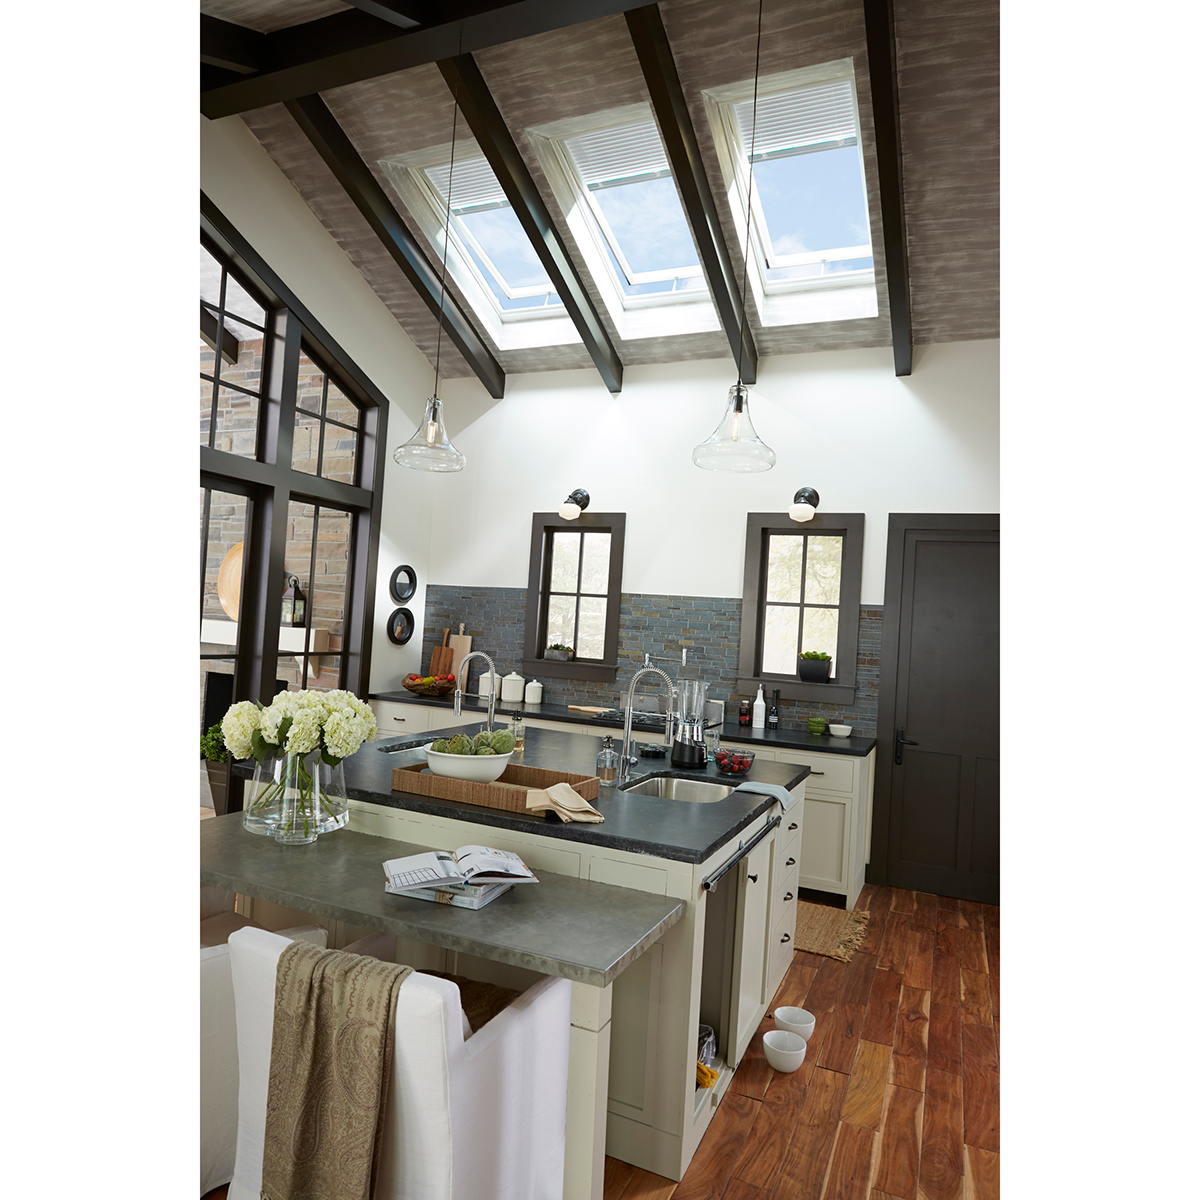 Manual Curb-Mount Skylight with Laminated Low-E3 Glass - 46-1/2 in. x 46-1/2 in. - VCM 4646